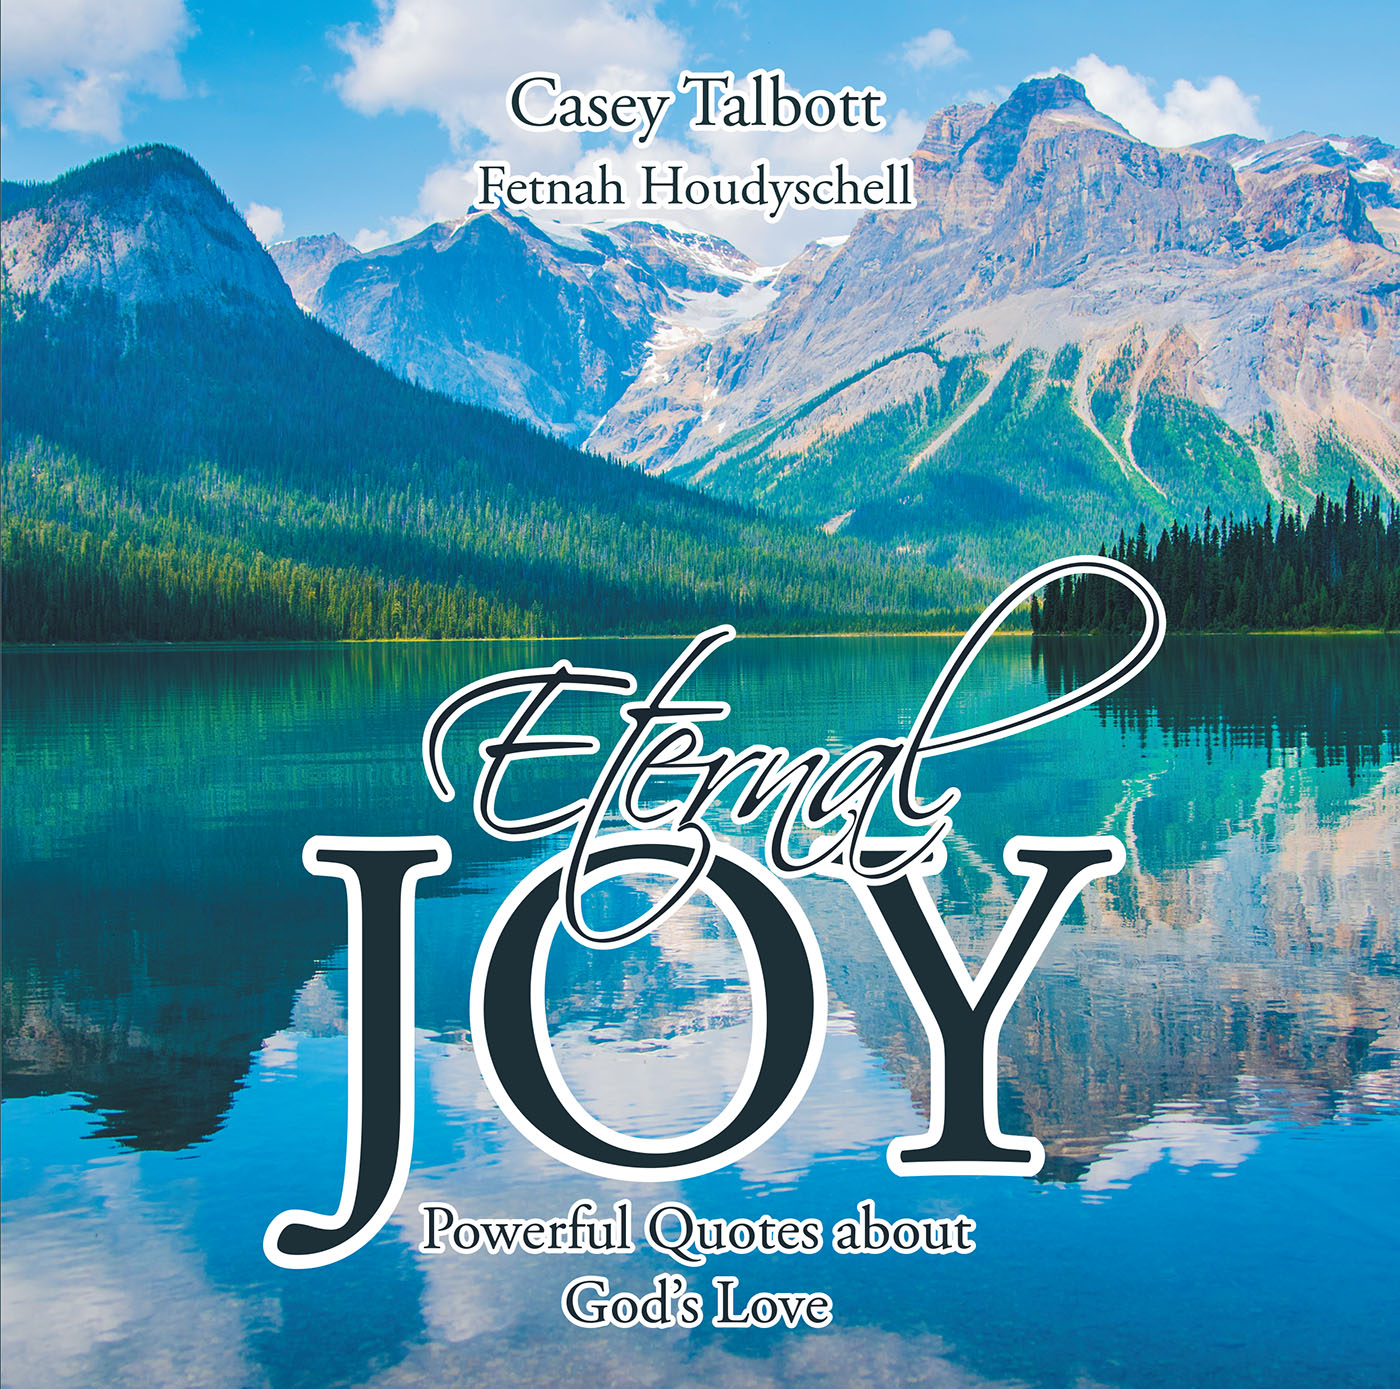 Authors Casey Talbott and Fetnah Houdyschell’s New Book, “Eternal Joy, Powerful Quotes about God's Love,” Explores What Living a Full Life in Christ's Image Can Provide